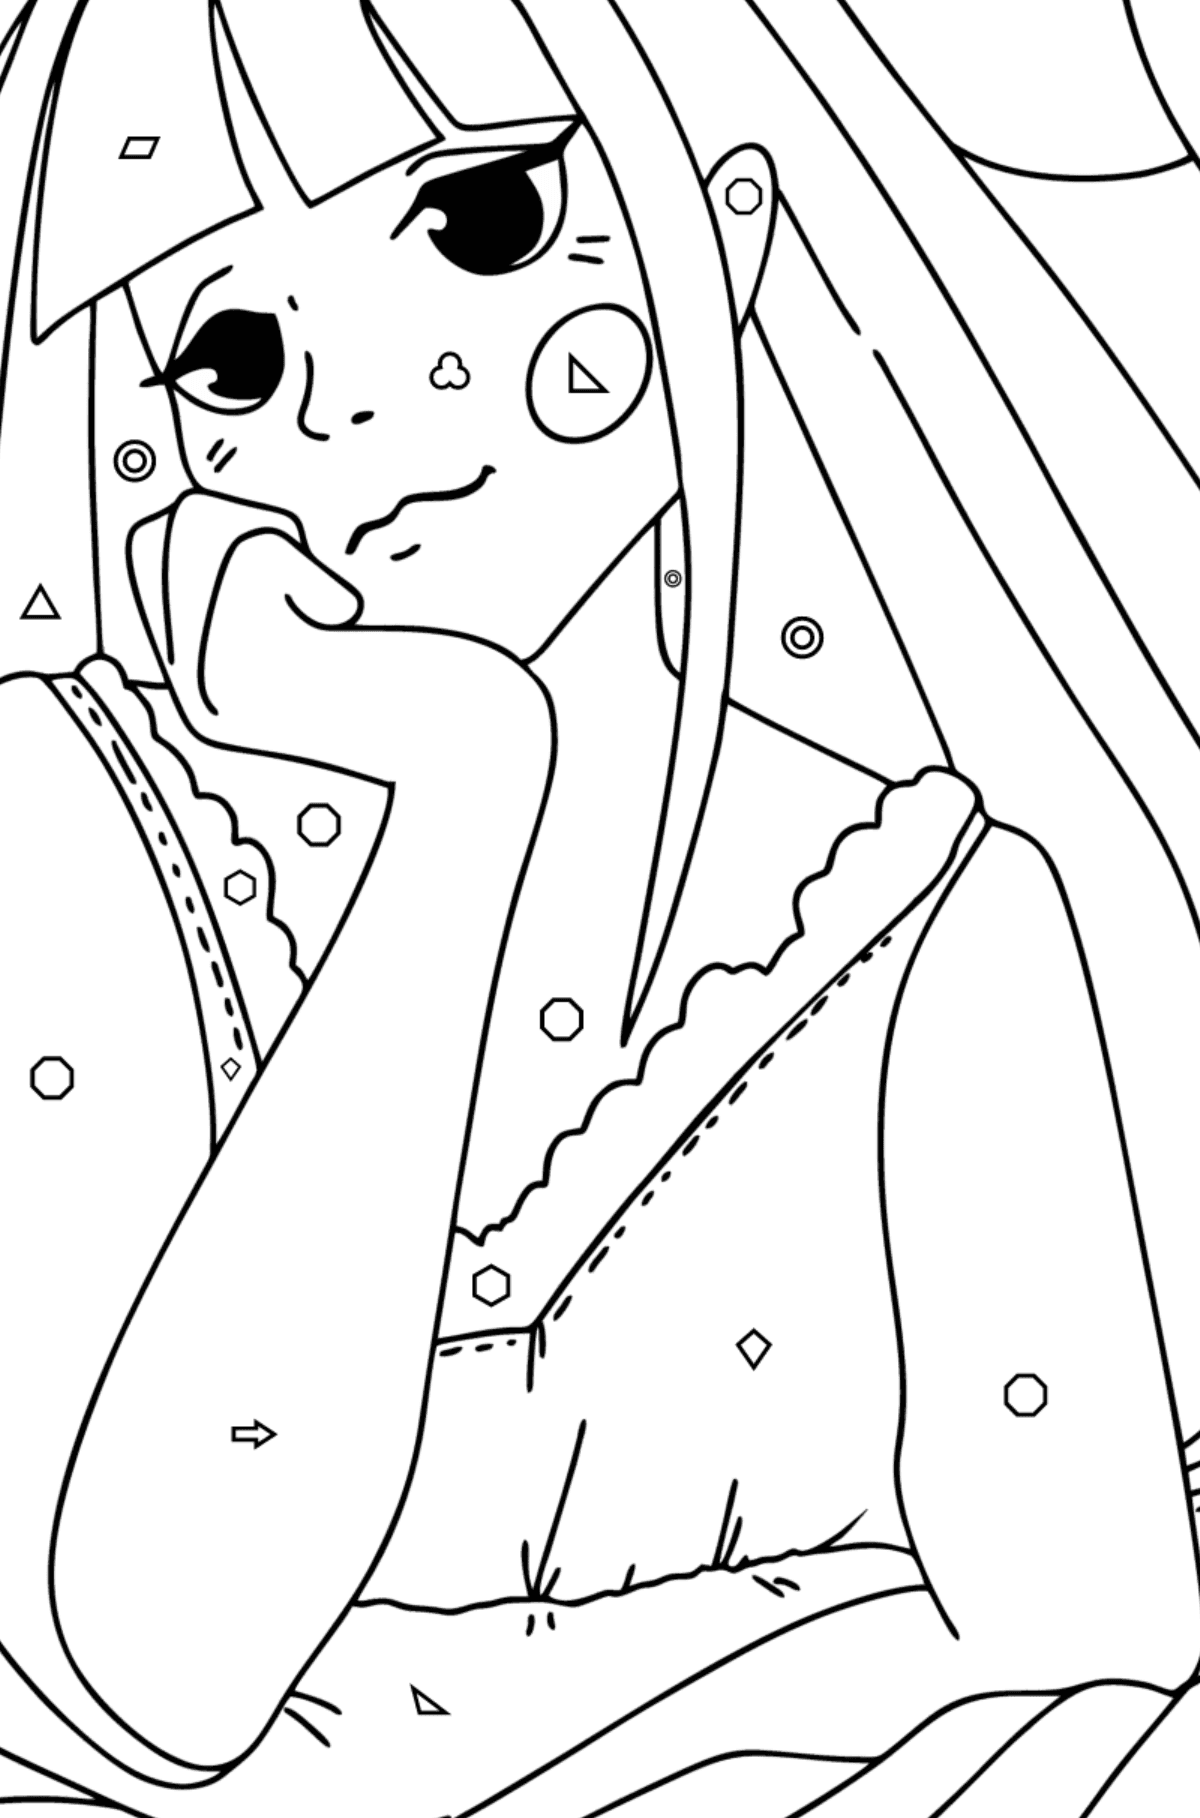 Teenage anime girl coloring page - Coloring by Geometric Shapes for Kids